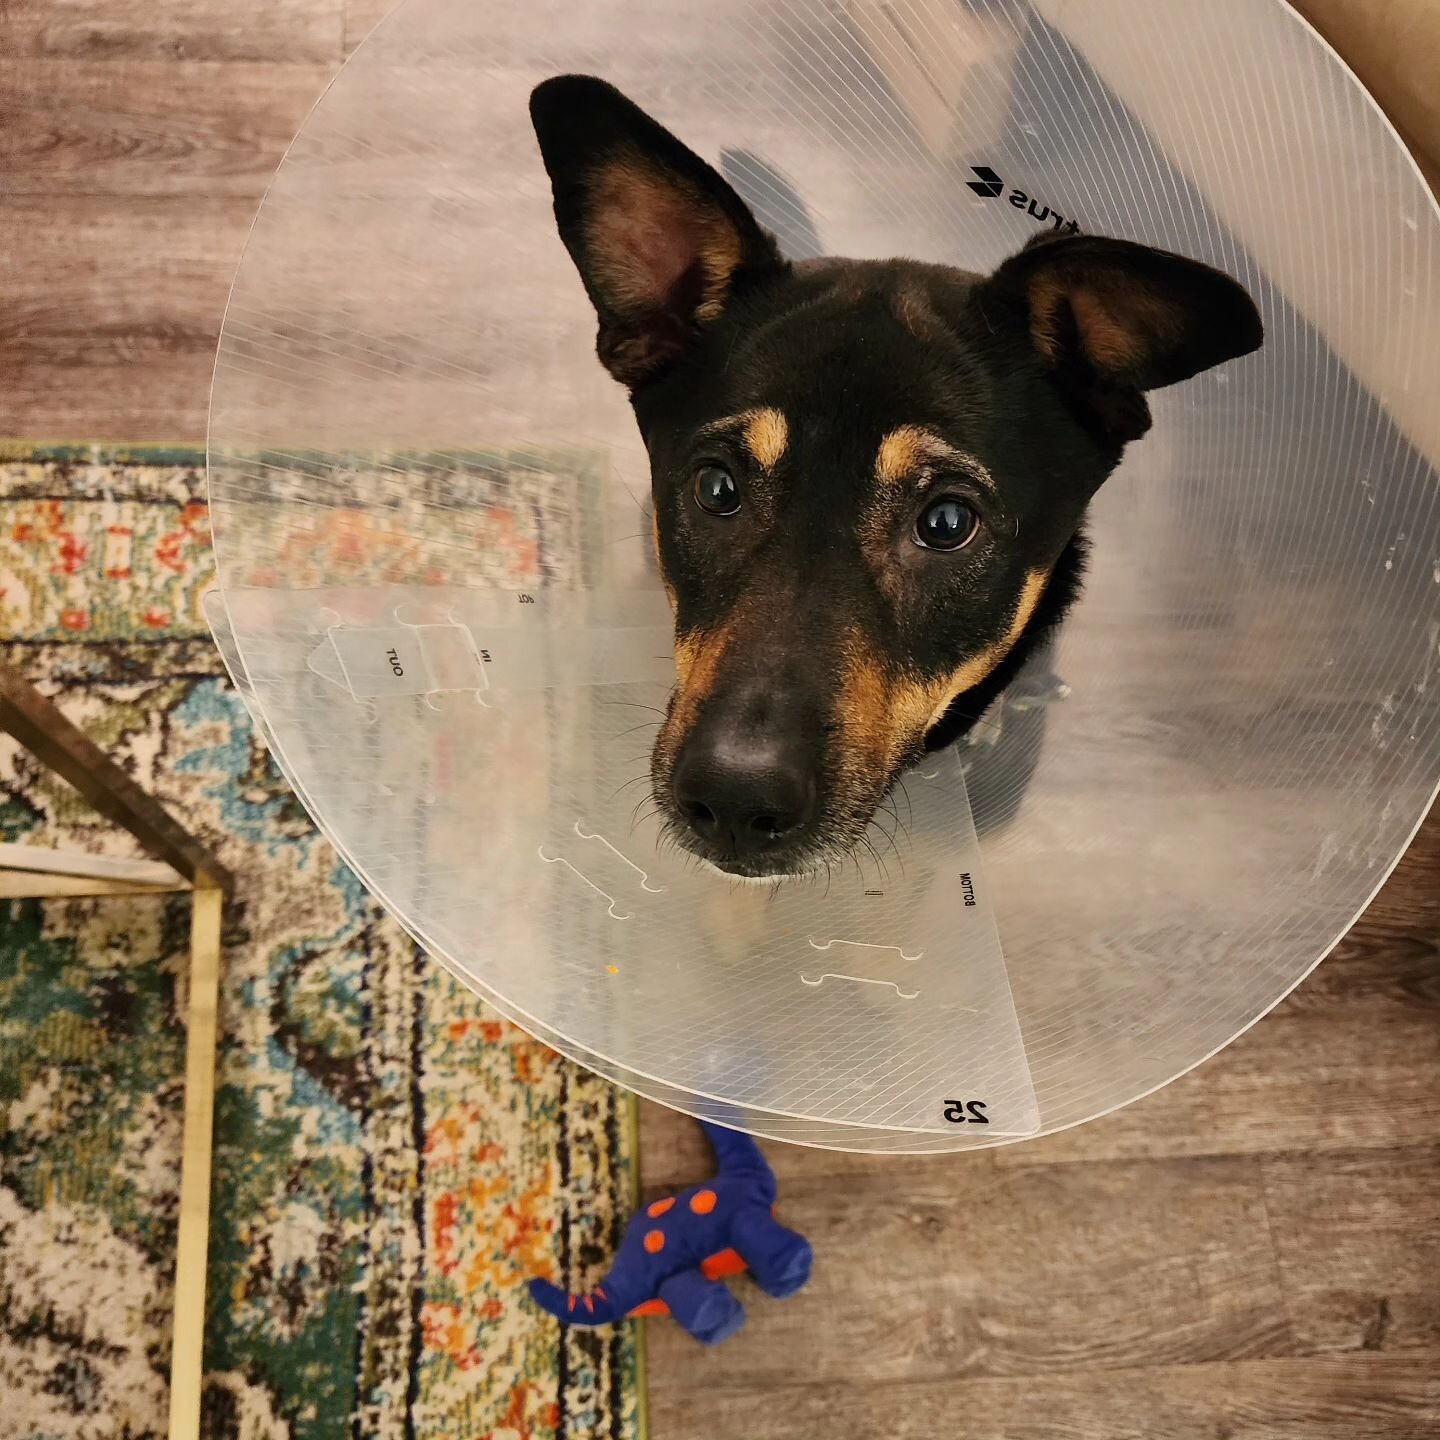 When you're a dog and you make bad choices, you end up in the cone!  At least humans get to discuss their bad choices in therapy instead